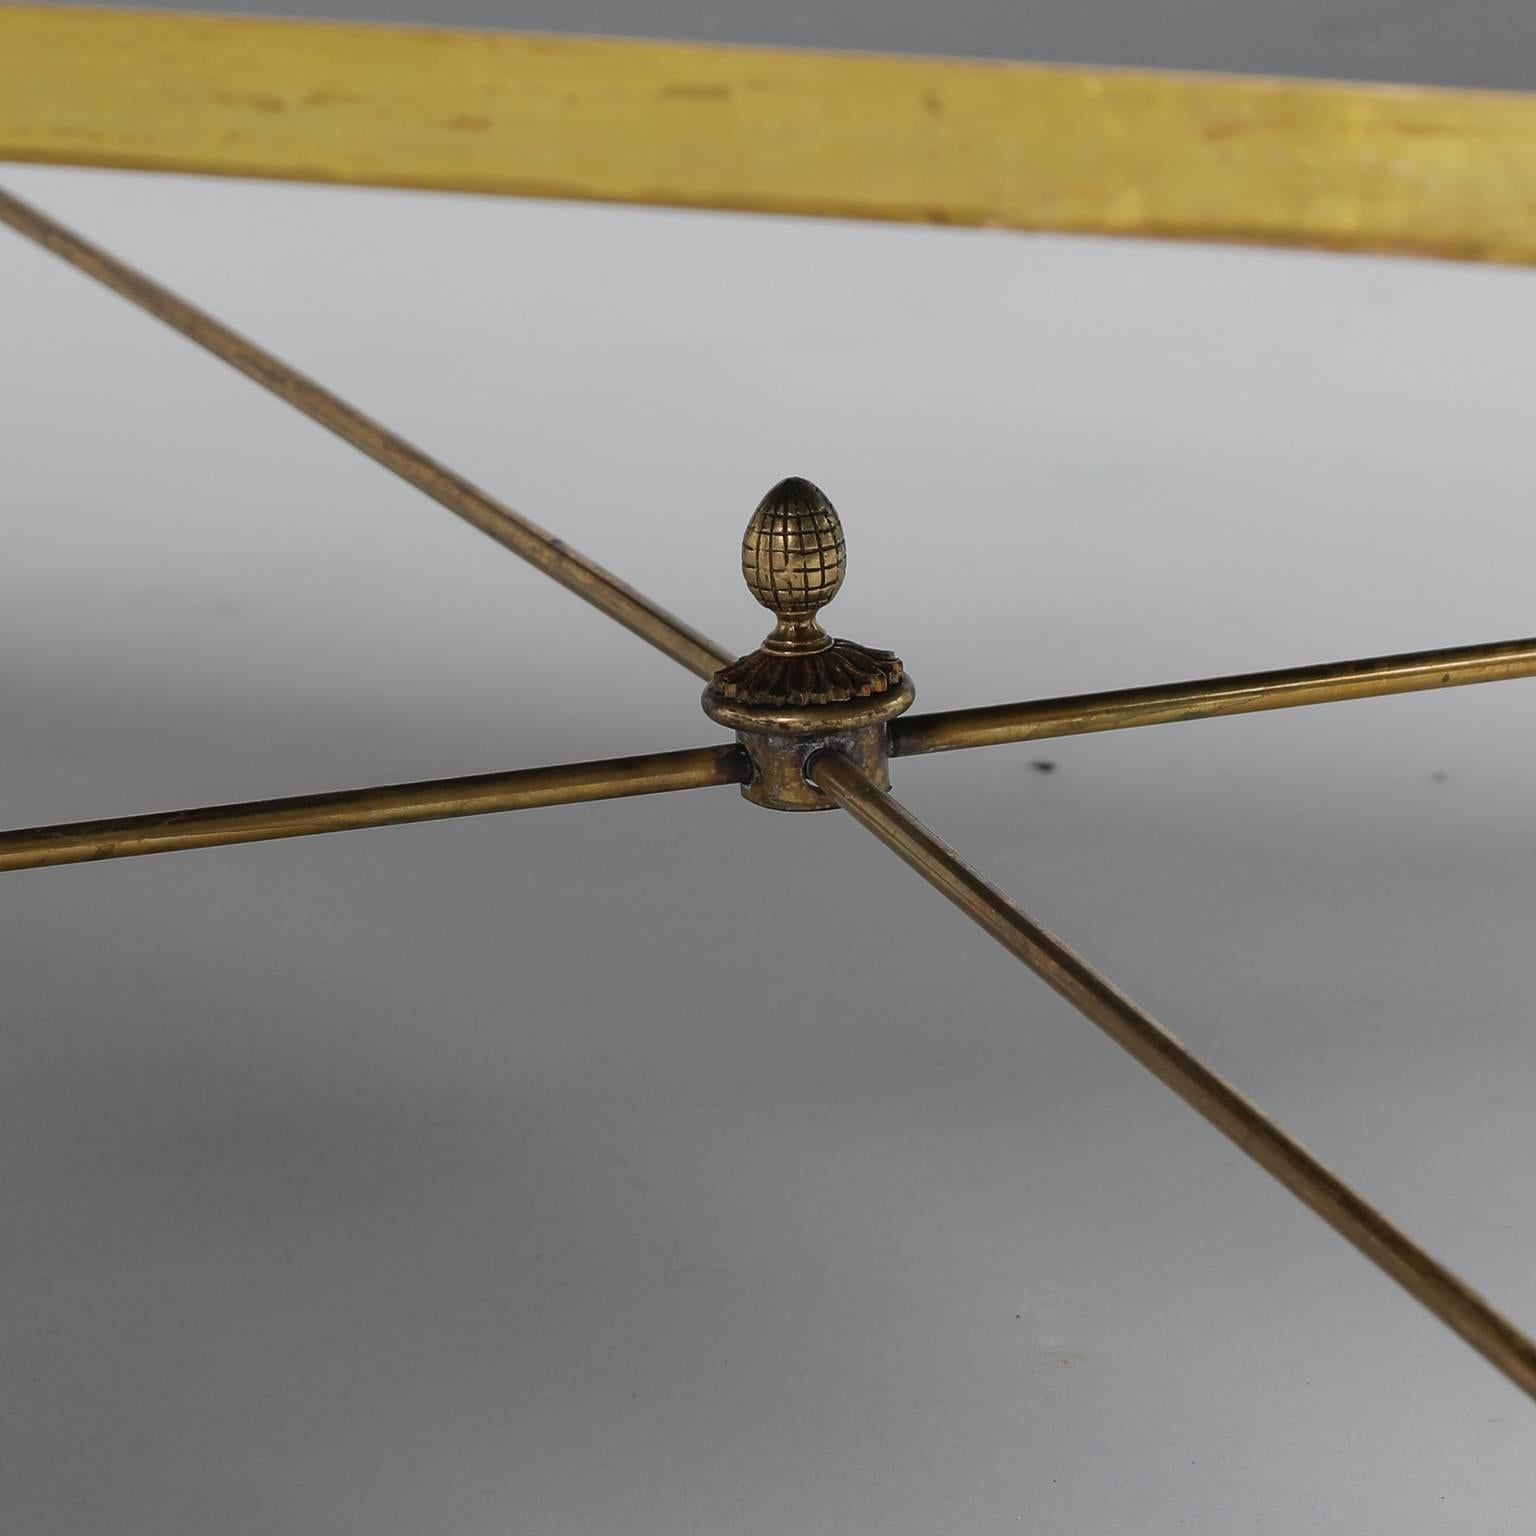 French glass and brass cocktail or coffee table has a brass frame with a finial topped X-form stretcher and detailed swan figures at the top of each corner and webbed swan feet support the table’s black glass top. Excellent vintage condition with